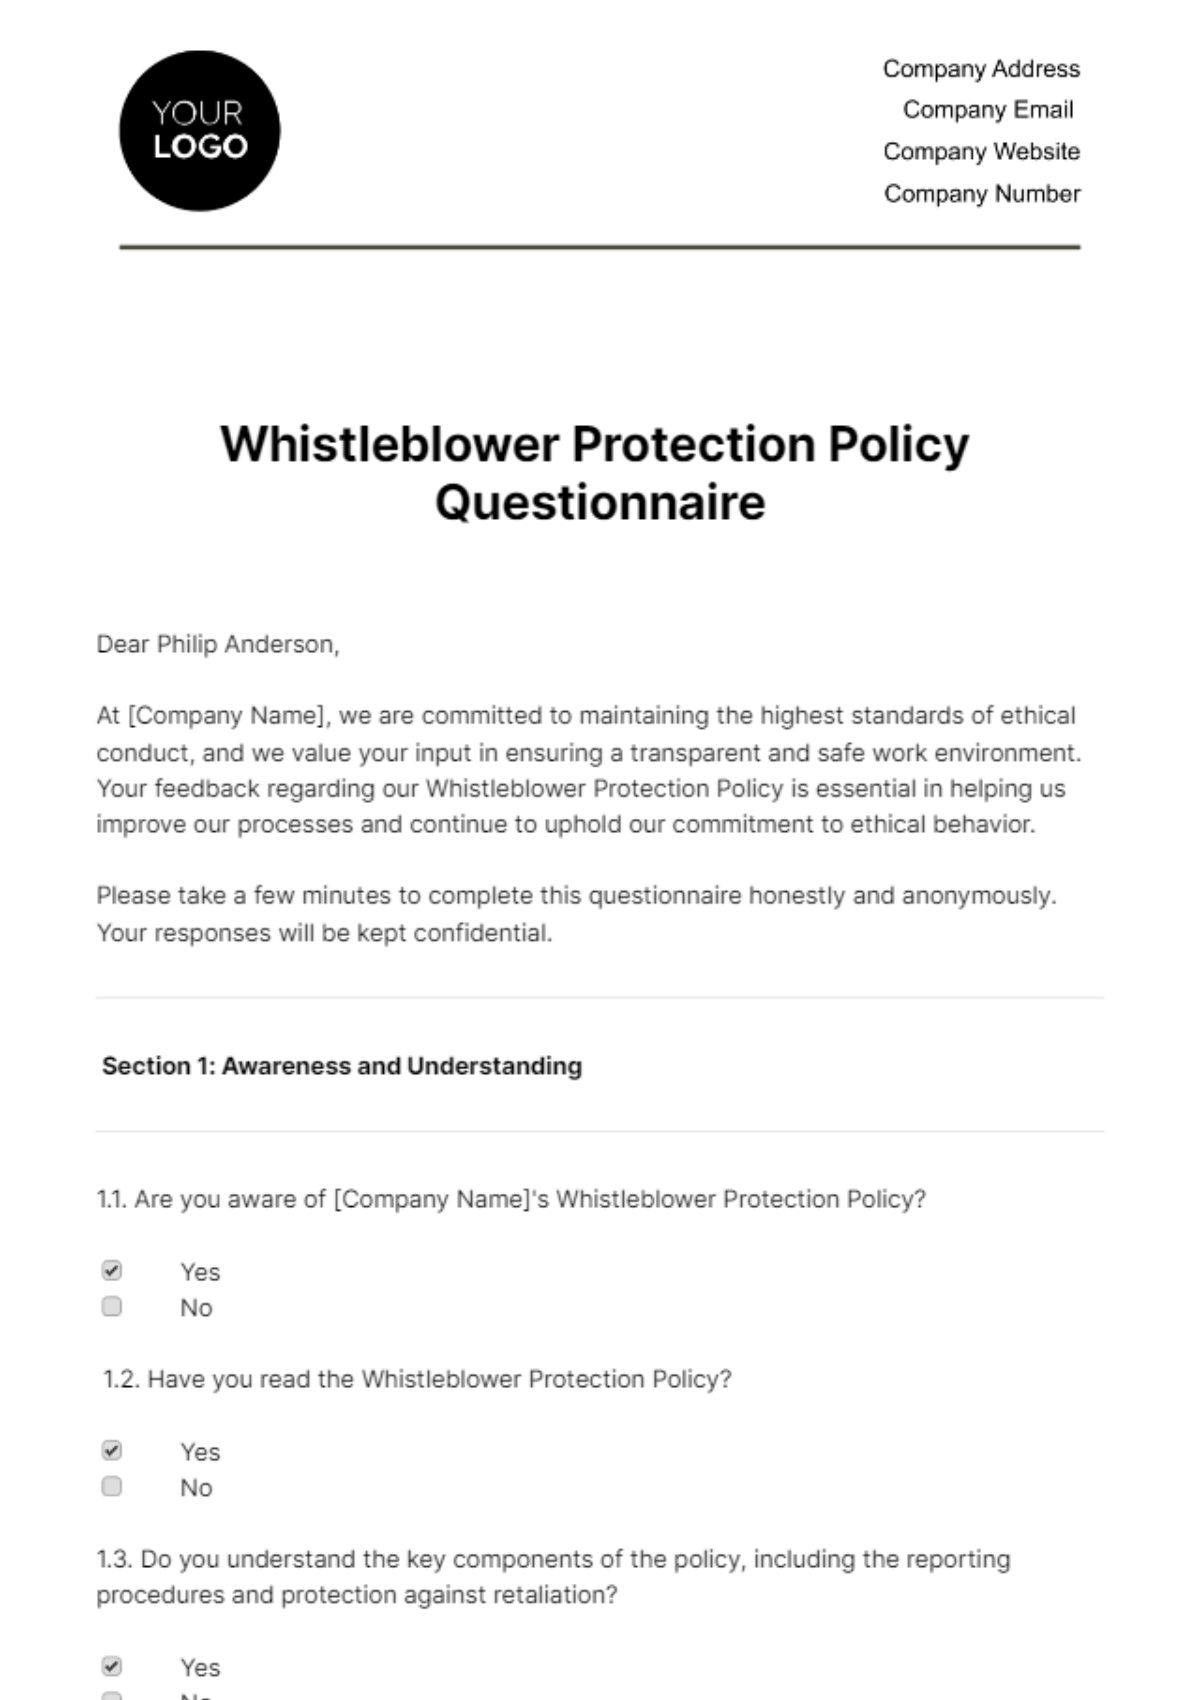 Free Whistleblower Protection Policy Questionnaire HR Template